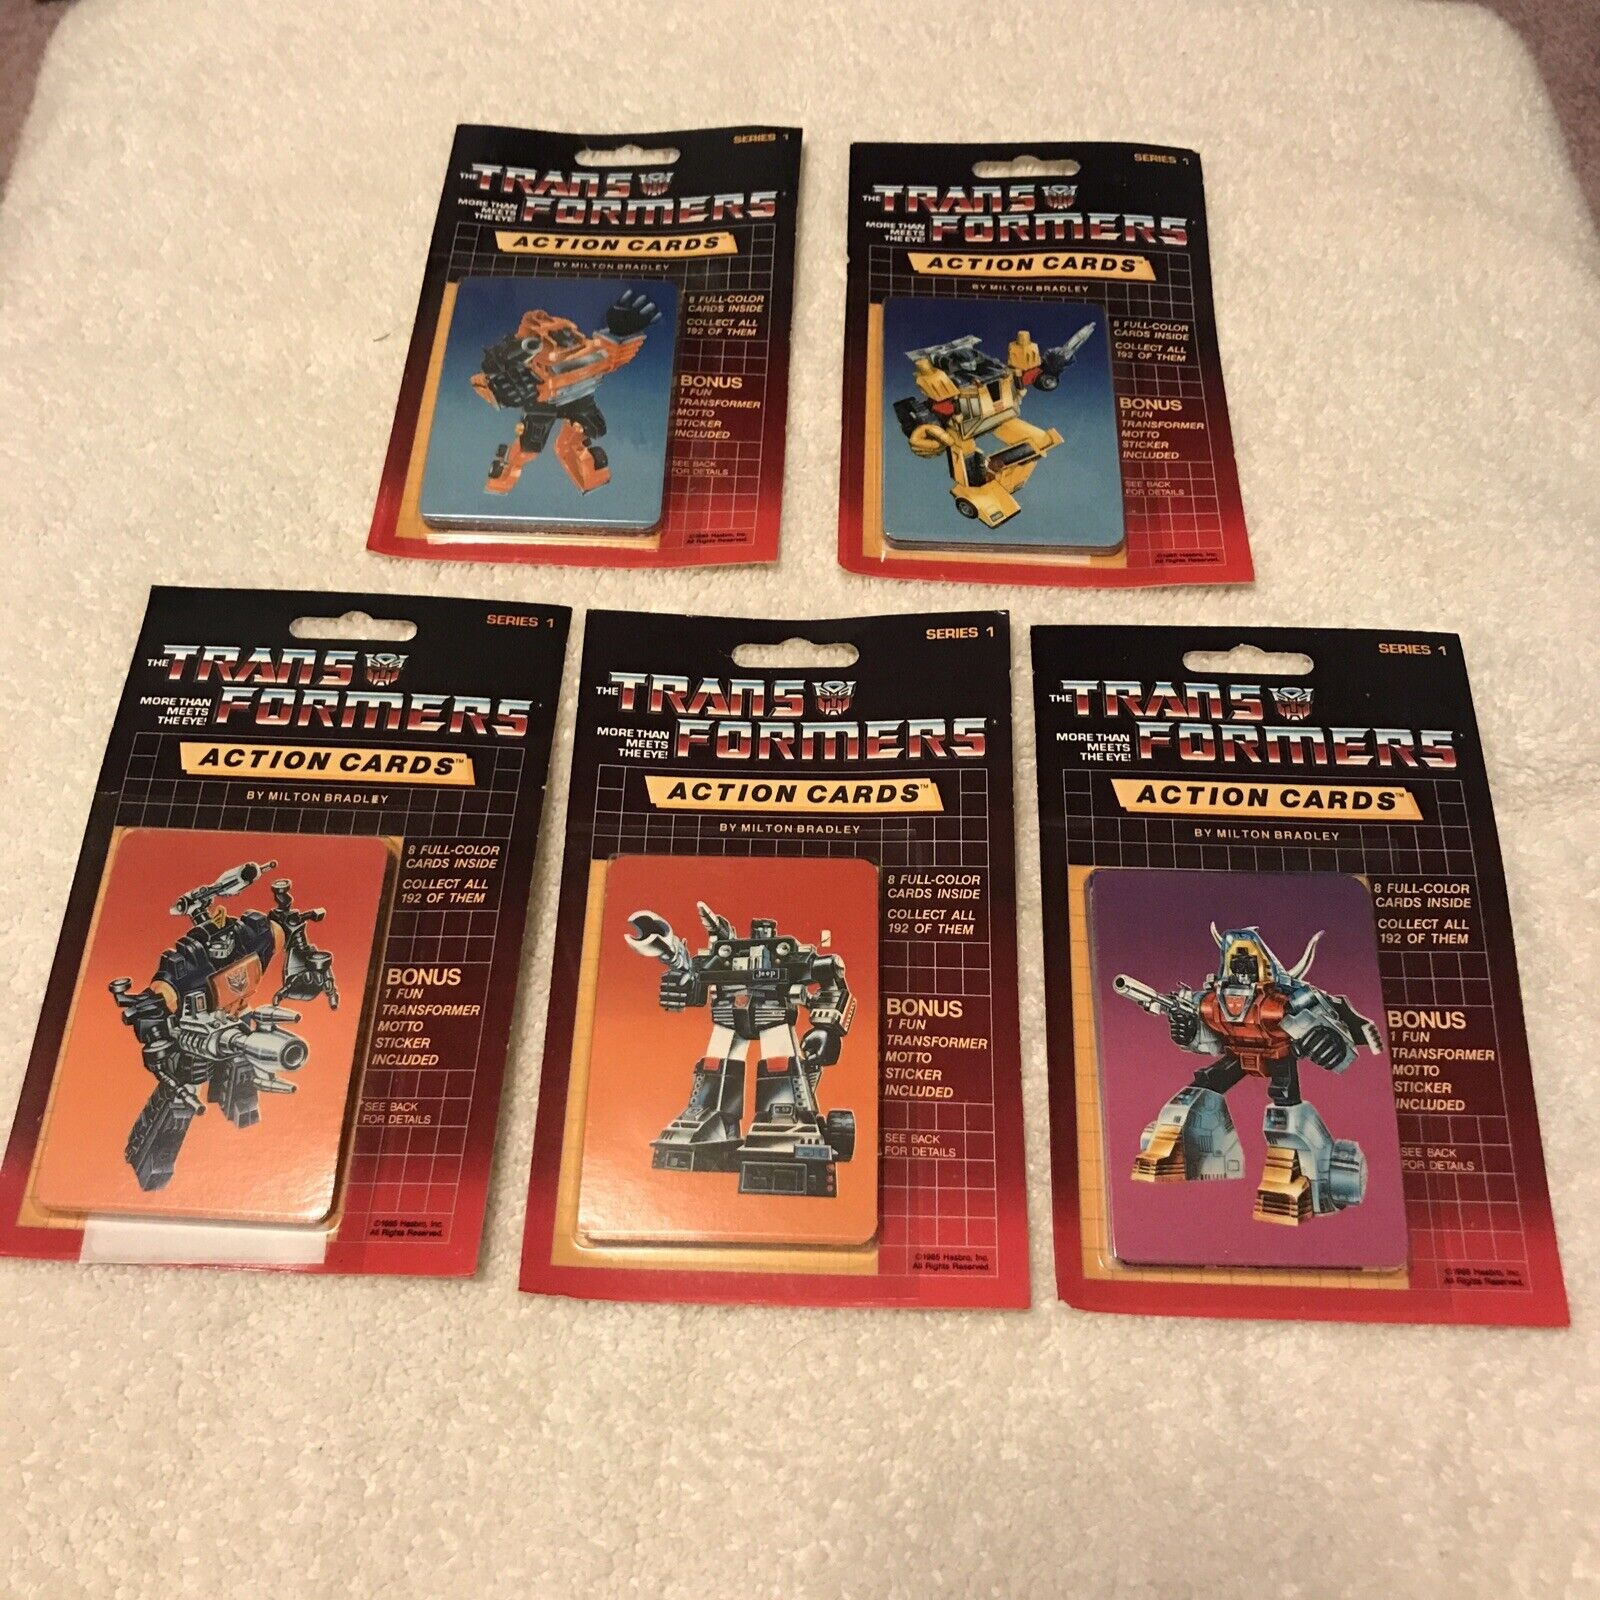 1985 Hasbro Transformers Action Cards By Milton Bradley -5- Sealed Packs